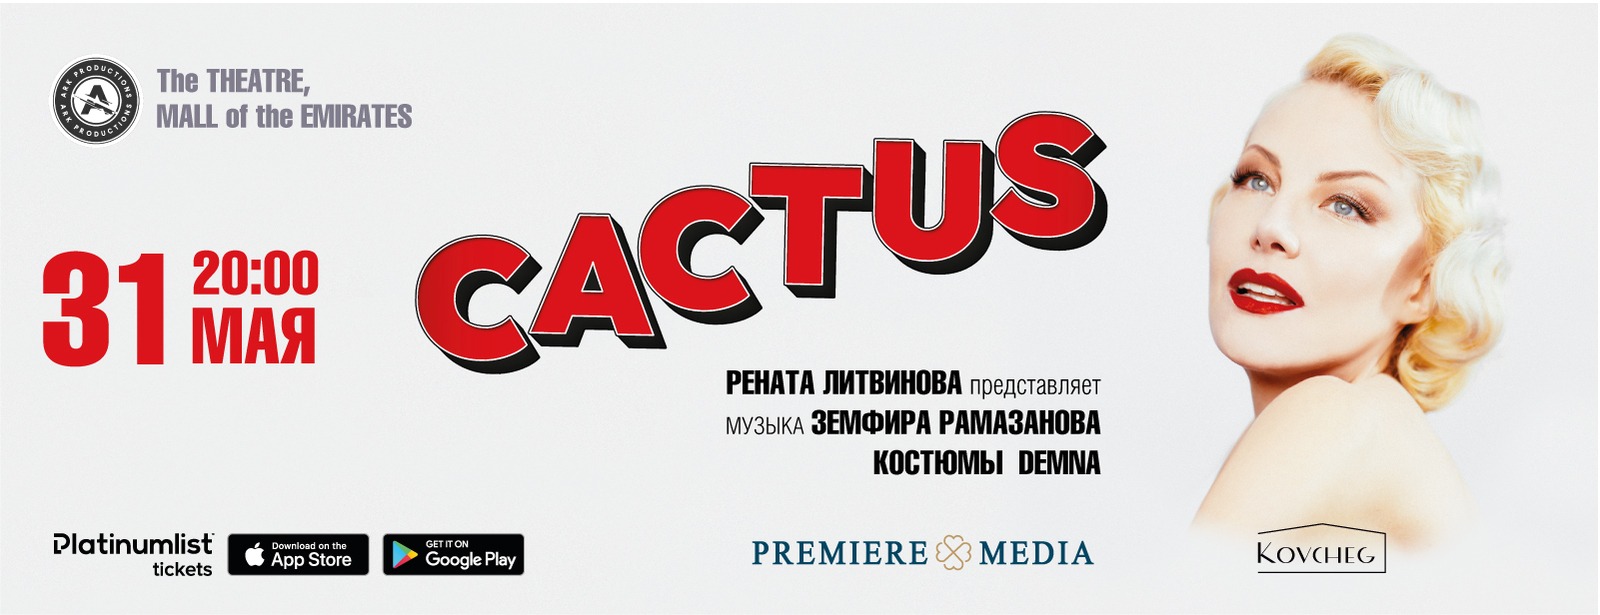 Kaktyc (Cactus) at The Theatre – Mall of the Emirates - Coming Soon in UAE